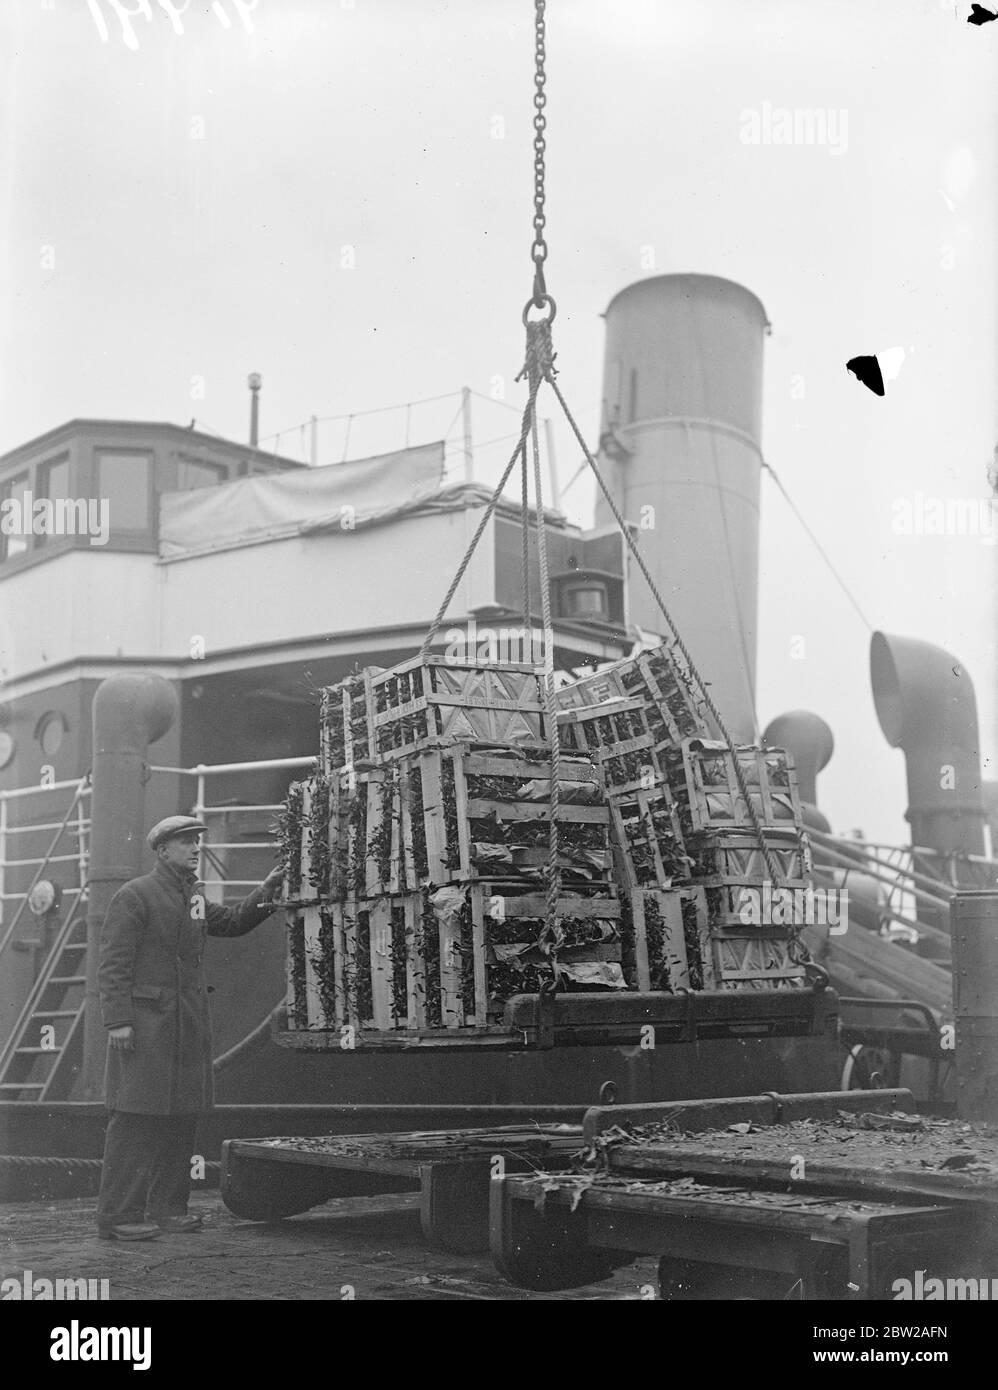 Mistletoe, arrives in England for Christmas. Shiploads of mistletoe are now arriving at Southampton from the continent to play its traditional part in Britain's Christmas festivities. Photo shows, one of the first shiploads of mistletoe being unloaded from the Southern Railway steamer 'Fratton'on his arrival at Southampton from St Malo, France. 7 December 1937 Stock Photo